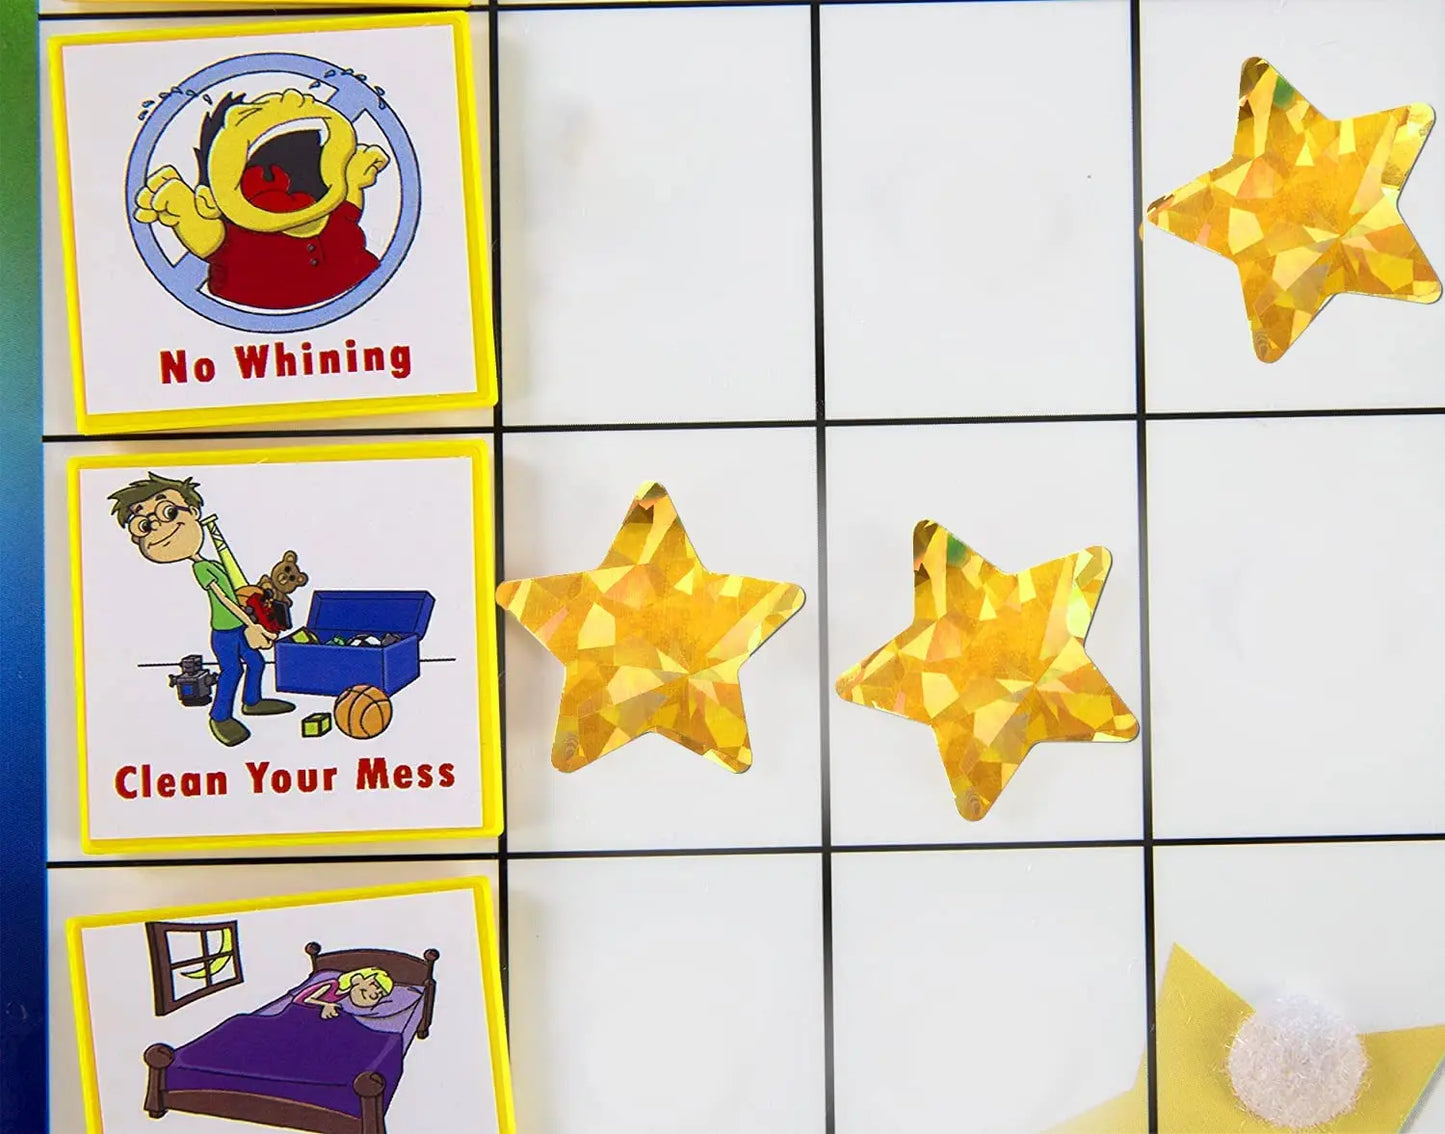 500Pcs Holographic Gold Star Stickers for Kids Reward Foil Star Stickers Labels for Wall Crafts Classroom Teachers Supplies